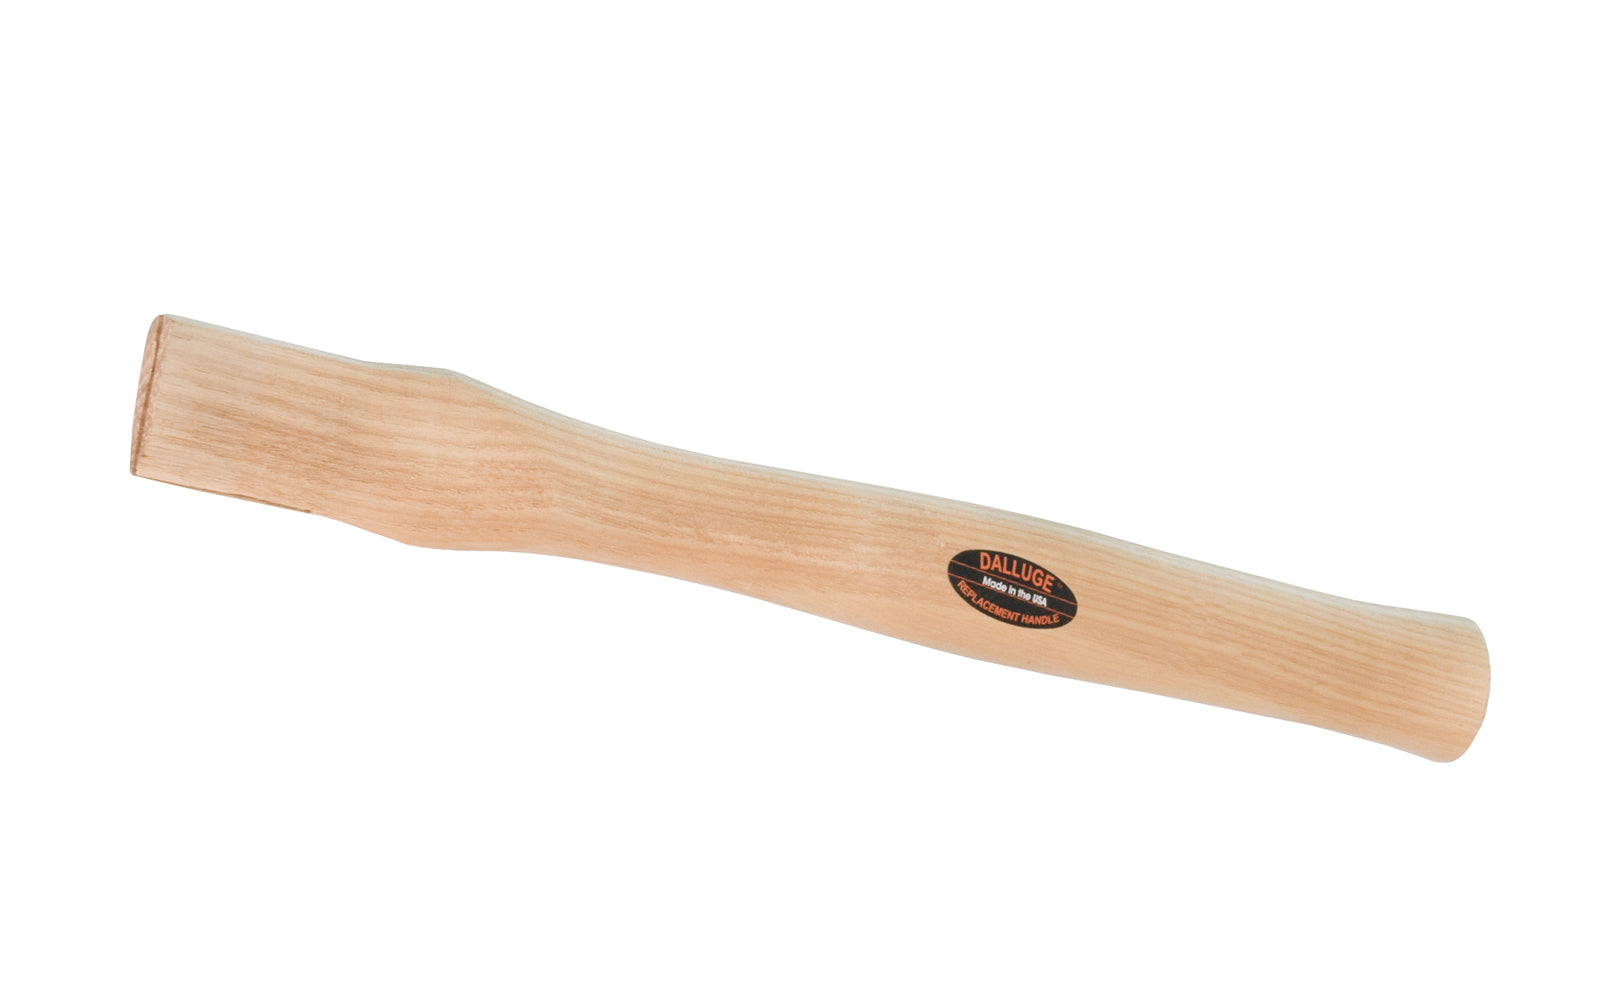 Dalluge straight replacement handle for 12 oz. & 16 oz. Trim Hammers. The 3200 is a sleek, aerodynamically contoured handle made from top quality American hickory machine-gauged to precise balance. Includes wood wedge & two steel wedges.  Vaughan & Bushnell Mfg. Made in USA. 698250032003